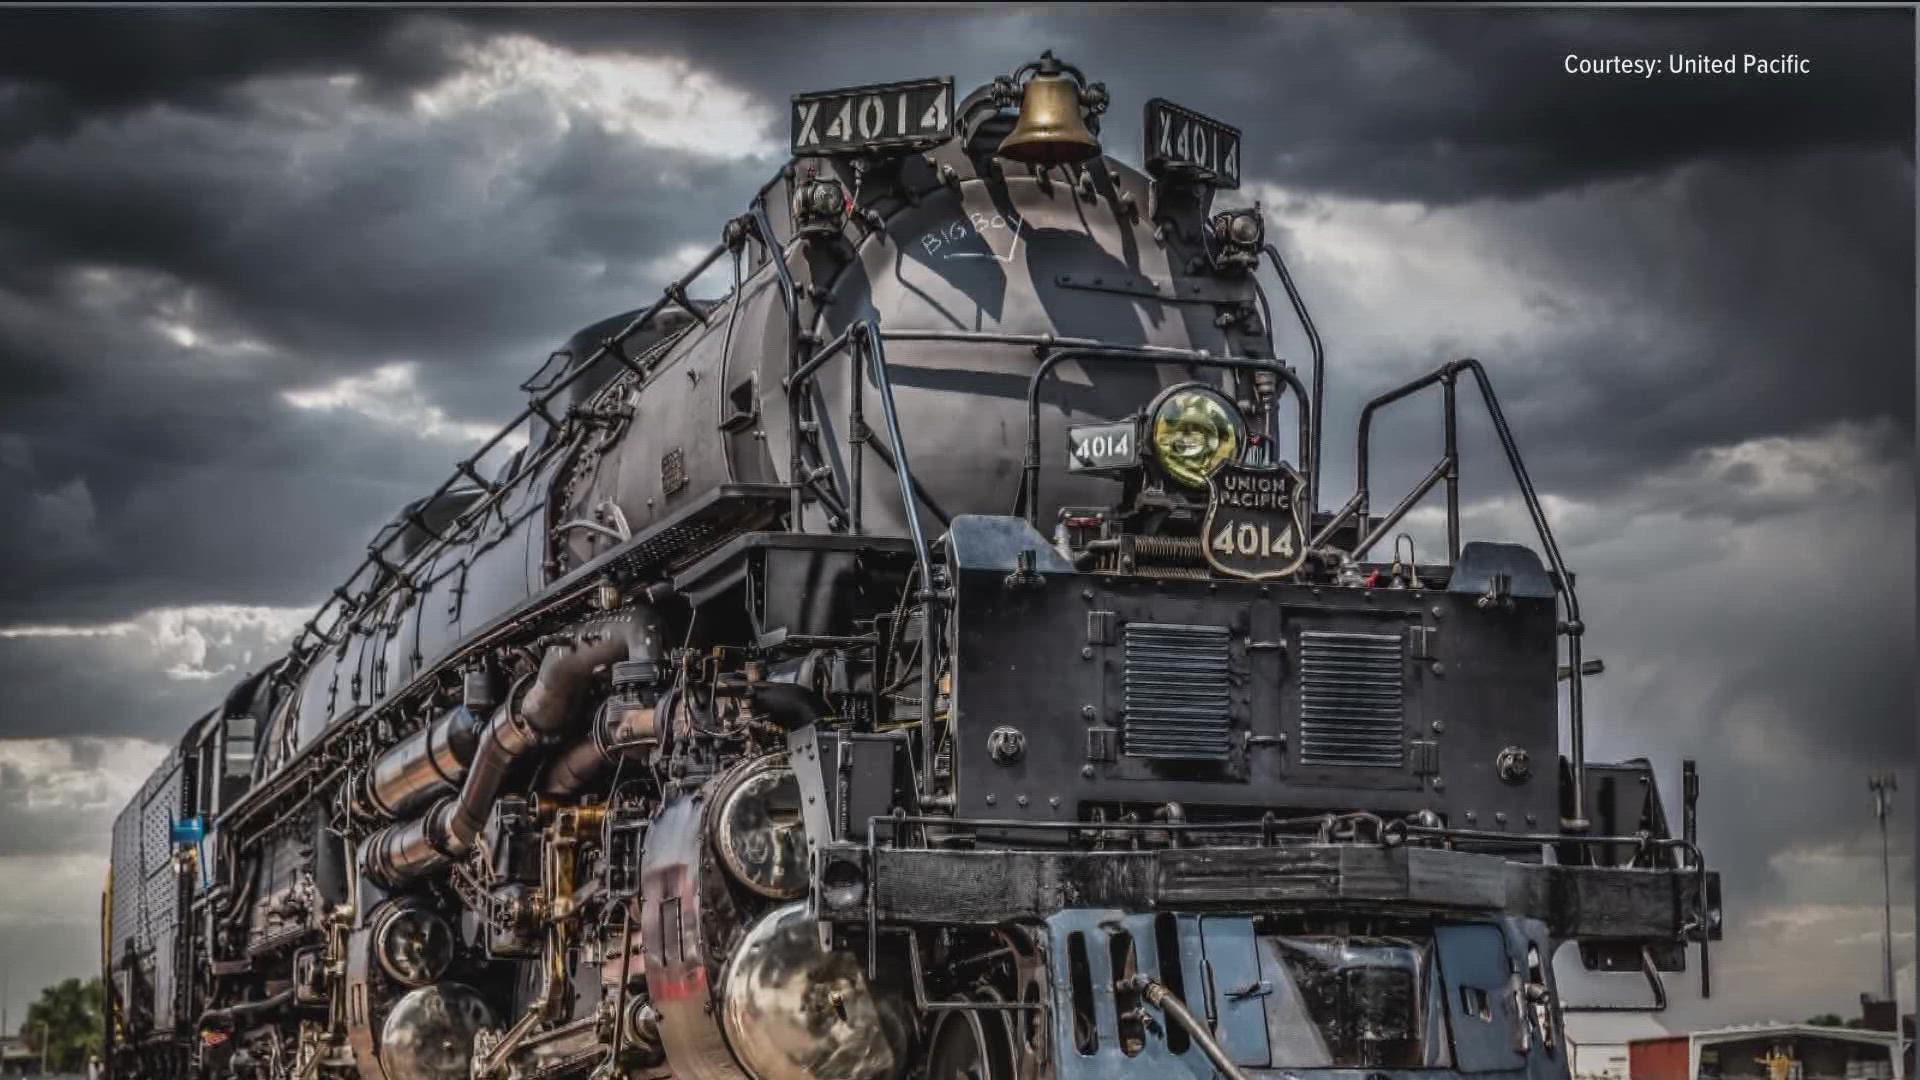 The tour had been scheduled to depart from Cheyenne, Wyoming on June 26. Union Pacific said the tour is postponed due to supply chain congestion.